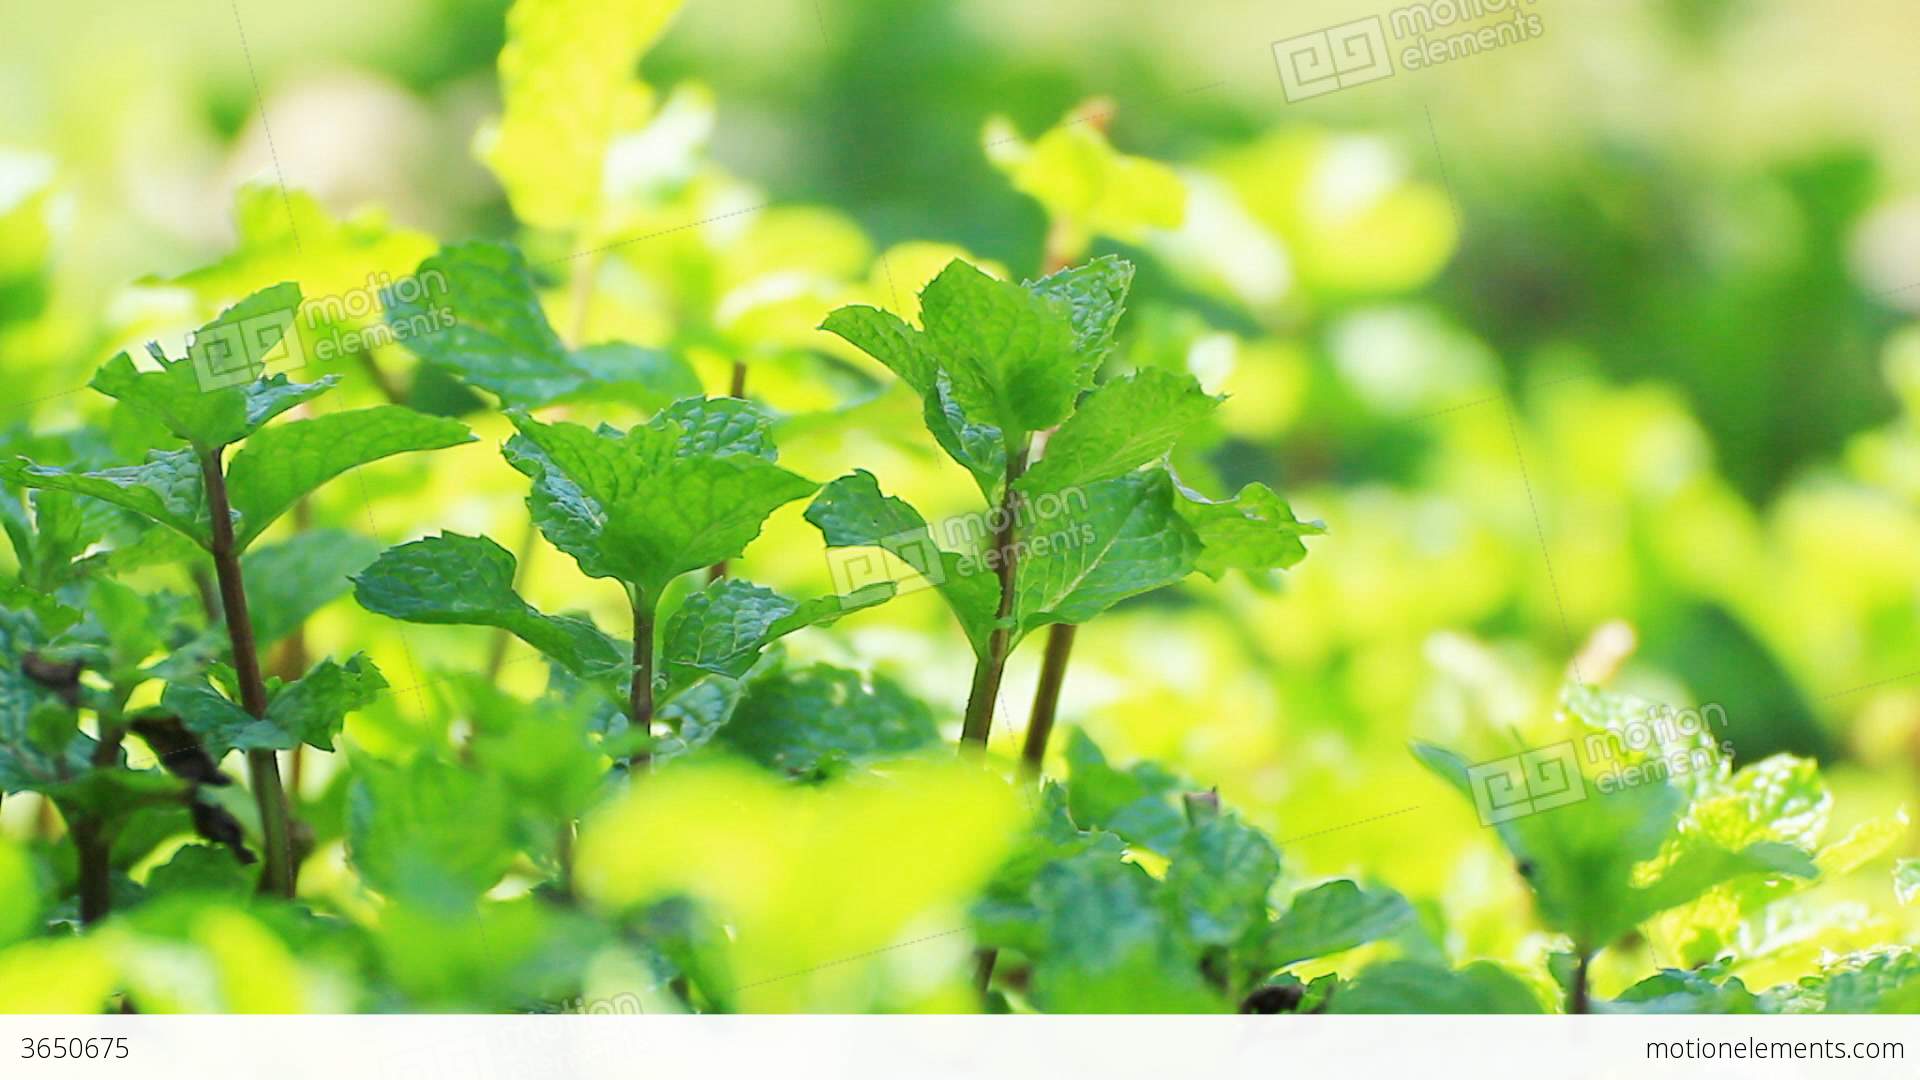 Pick Fresh Kitchen Mint Leaves From The Tree Stock video footage ...